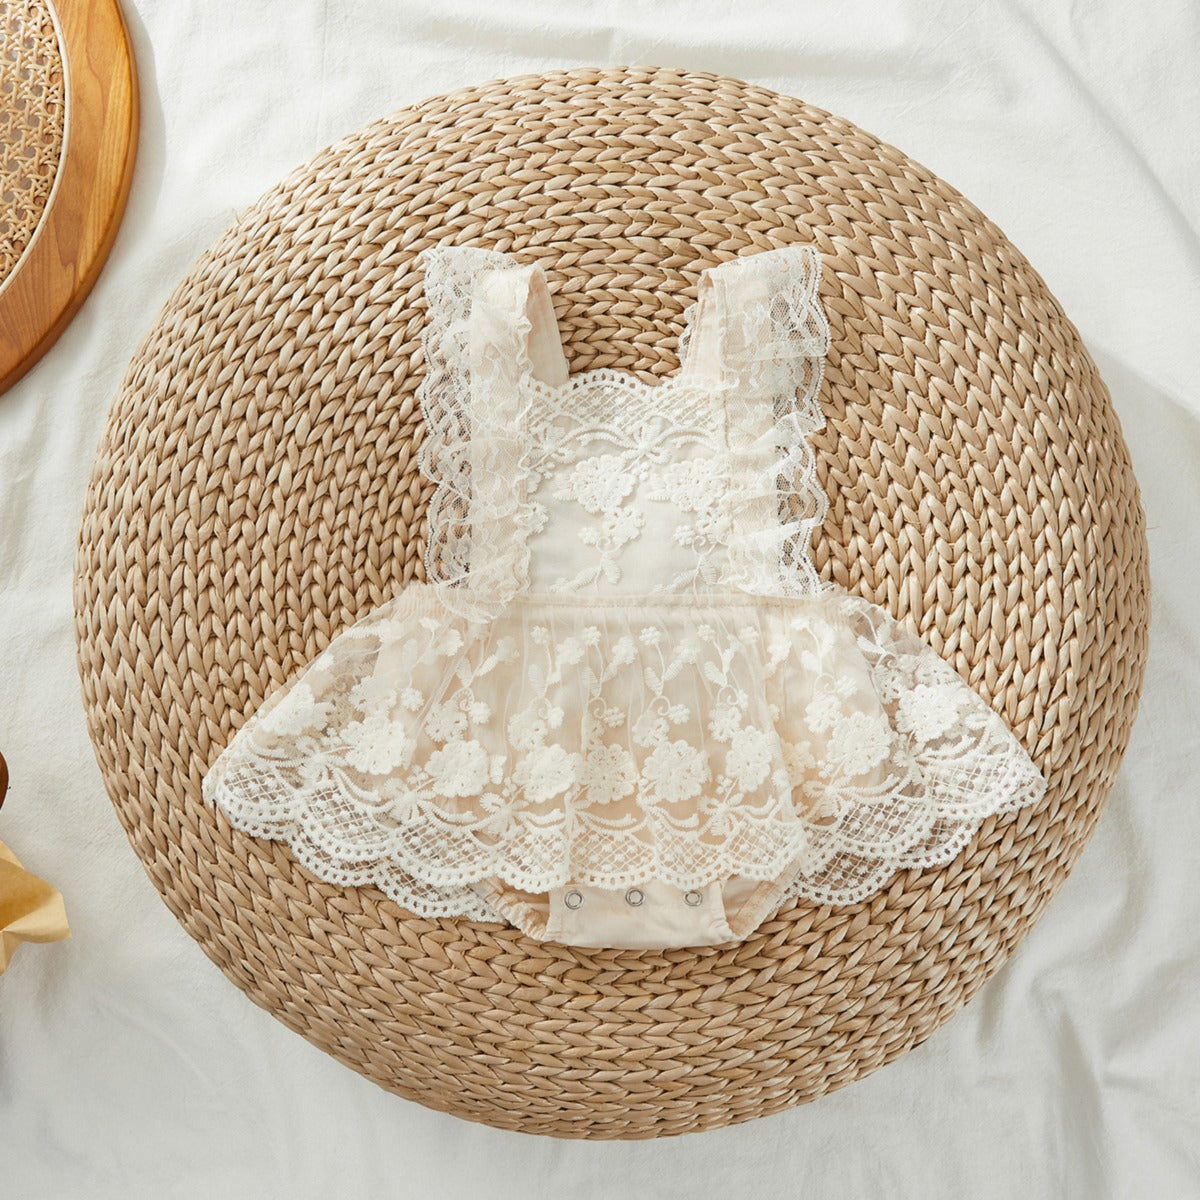 Lace Baby Romper